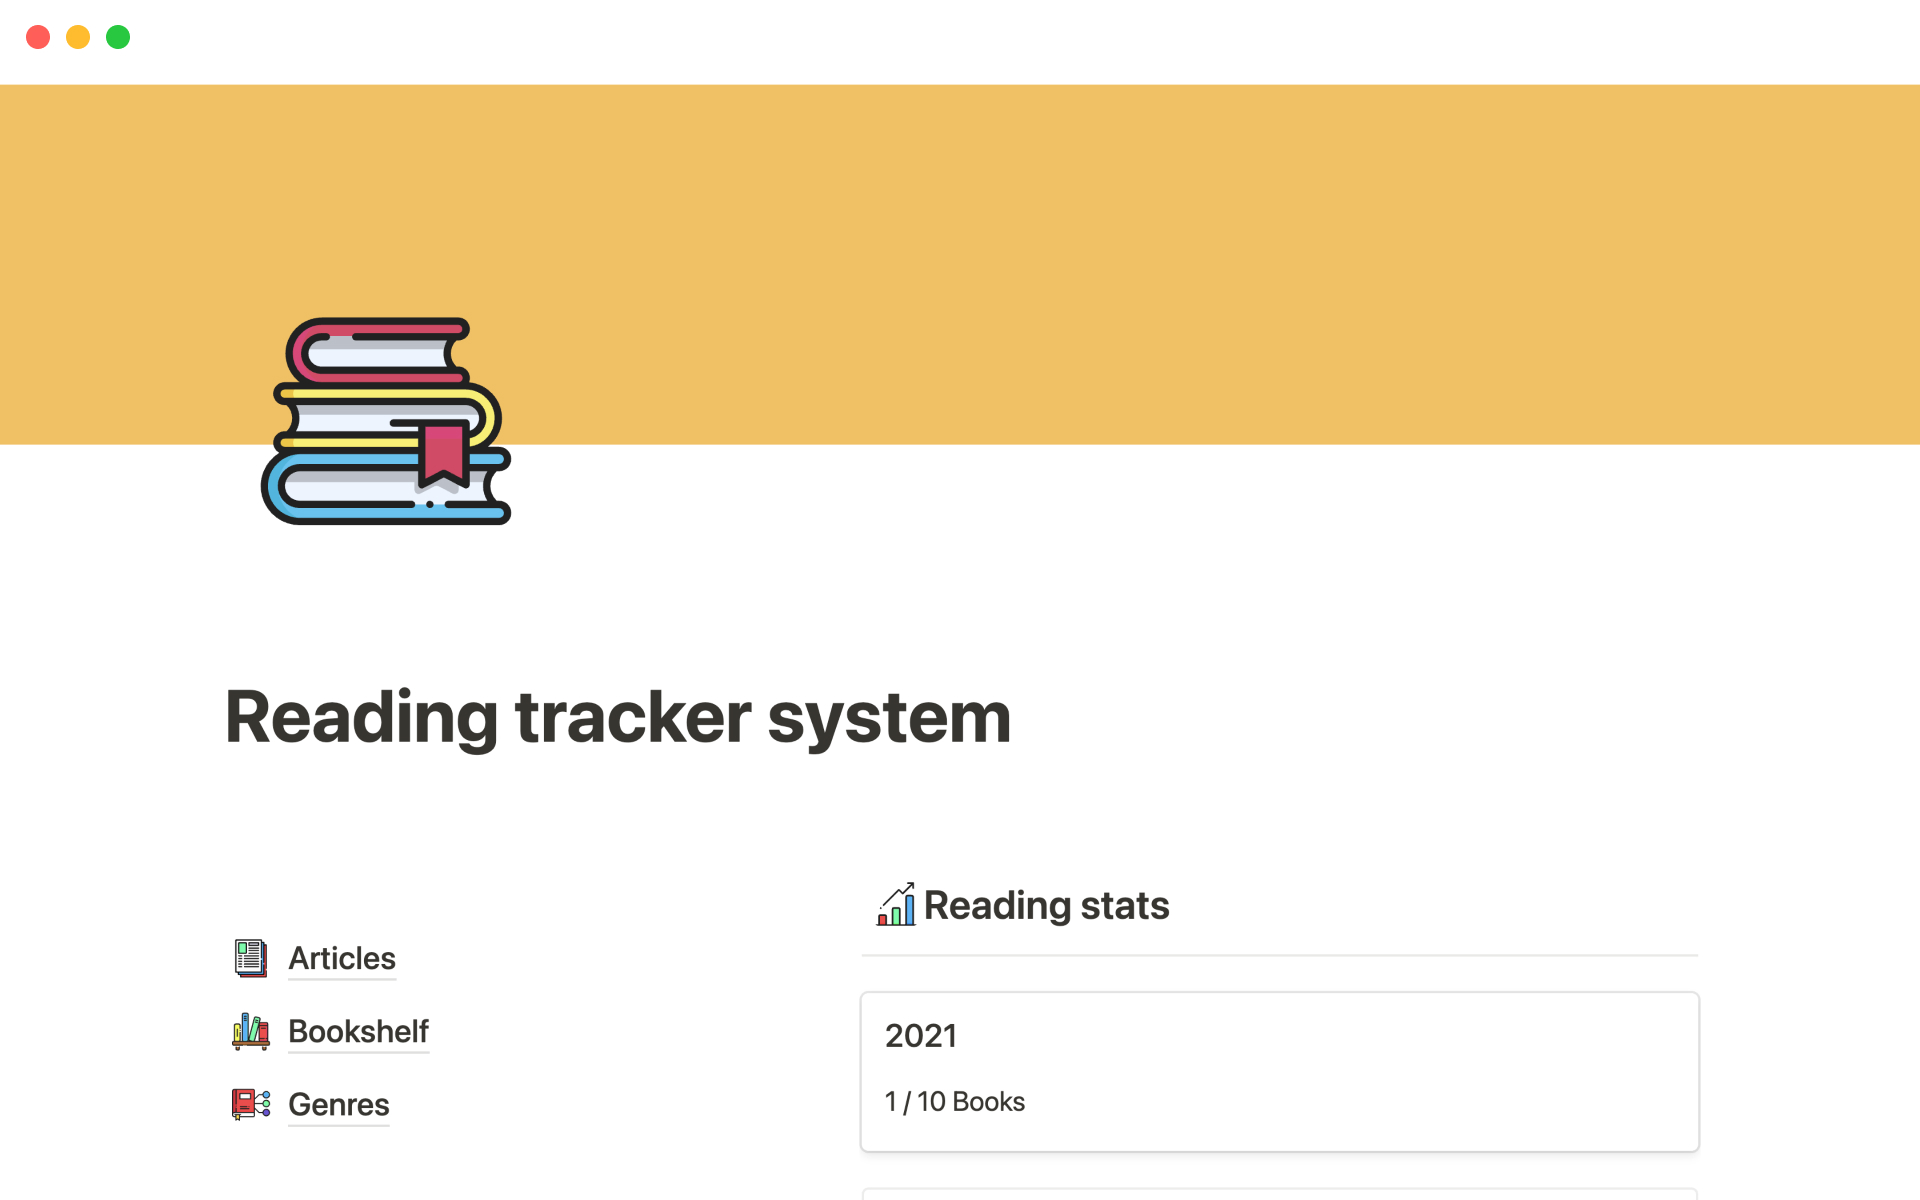 The desktop image for the Reading Tracker System template